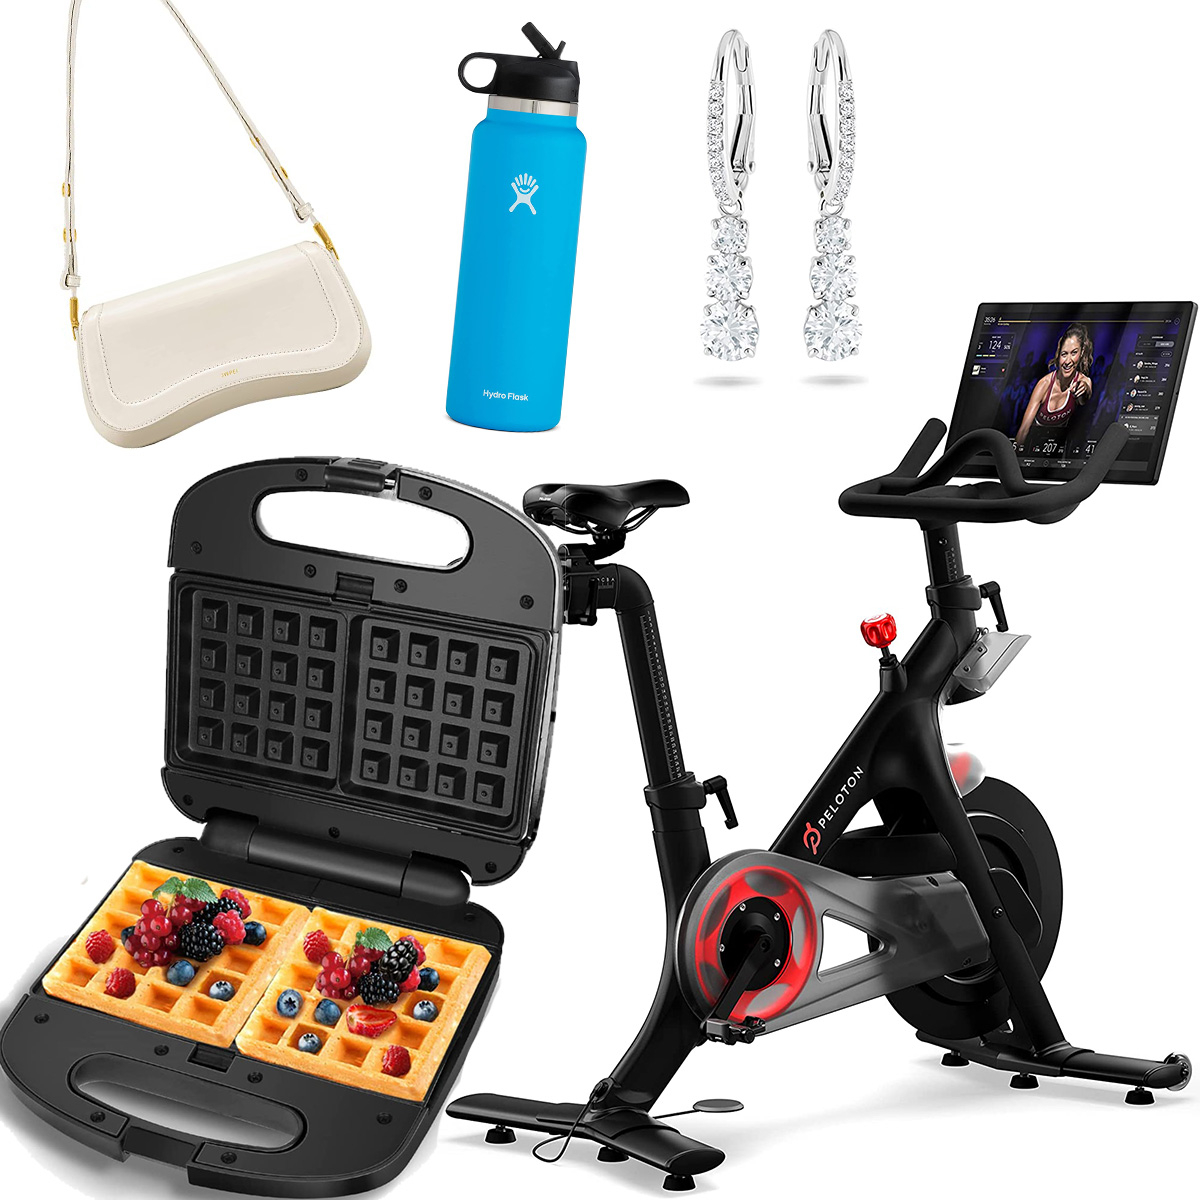 Amazon October Prime Day 2022 Deals on Holiday Gifts: Peloton, Swarovski & More